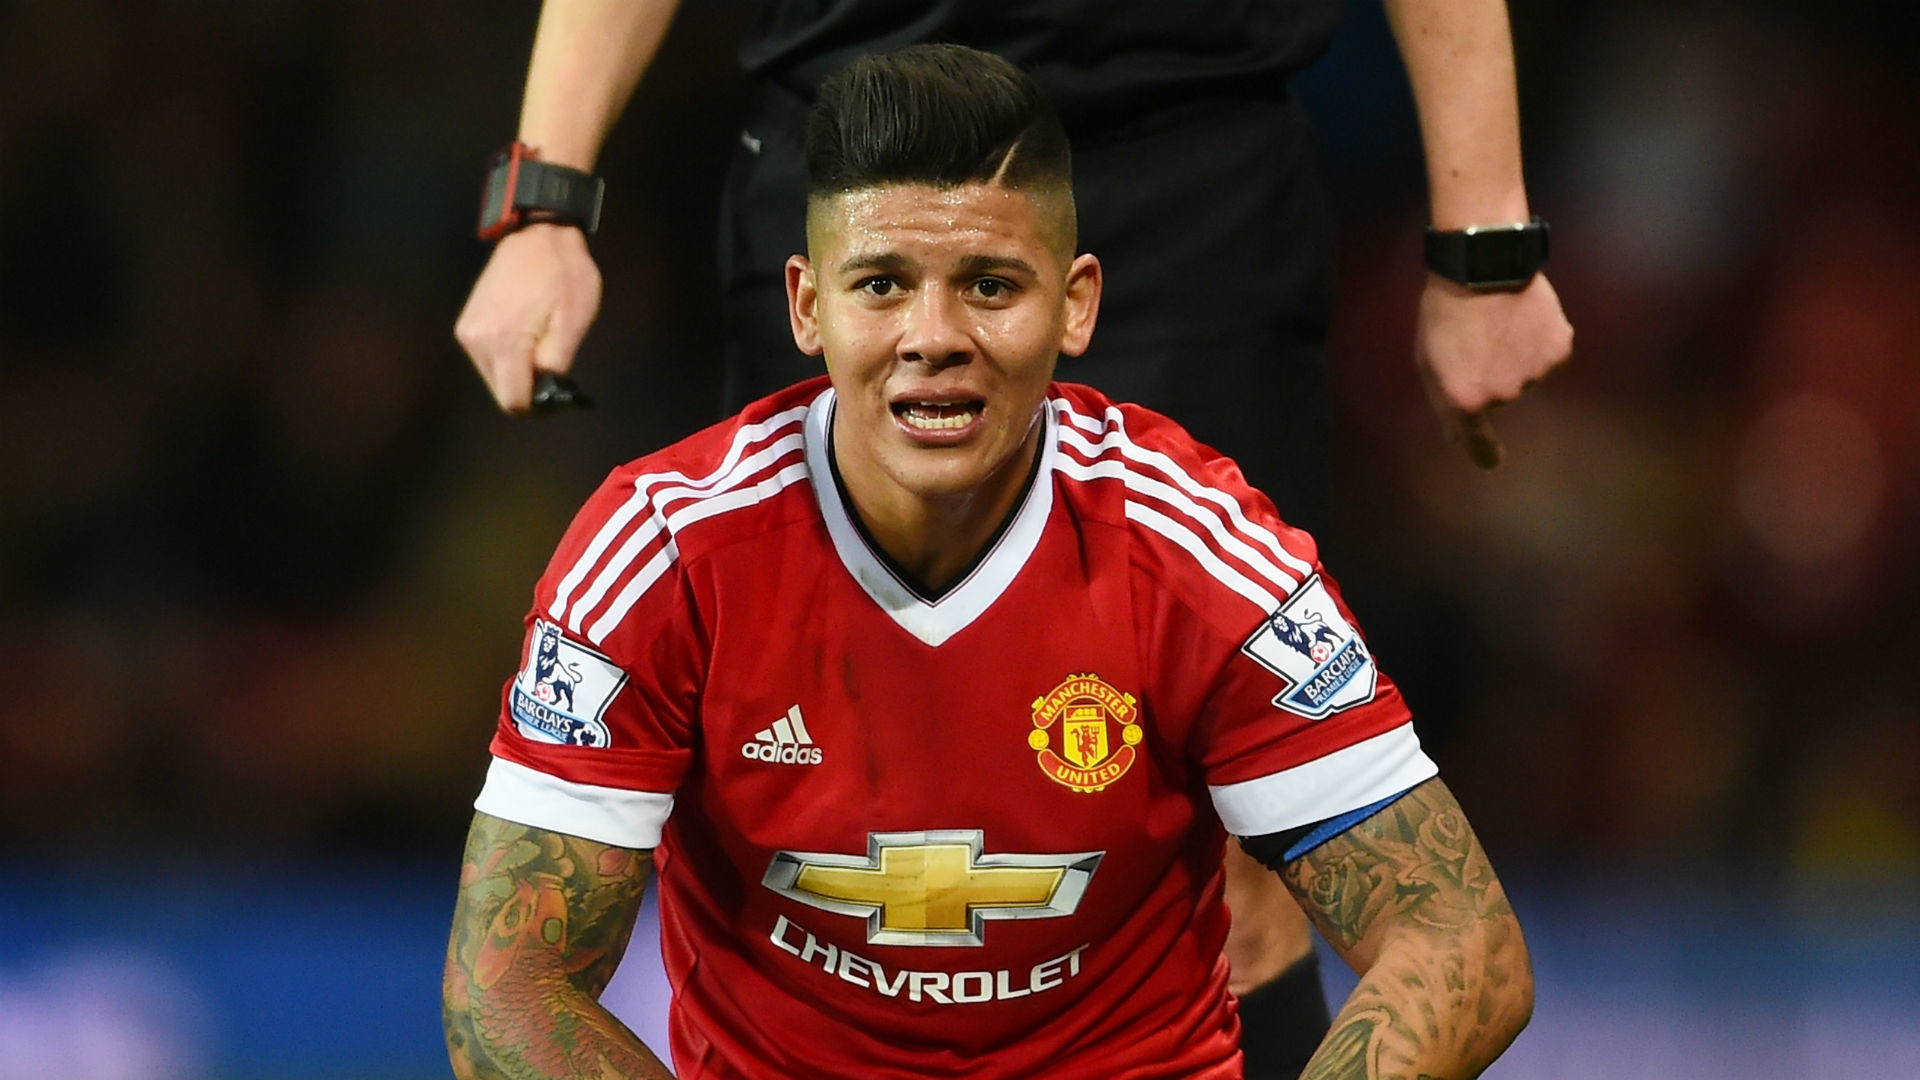 1920x1080 ... be the Red Devils' next manager, Rojo is set to be part of a clear-out  regardless in order to free up funds for a revamped squad going into  2016/17.